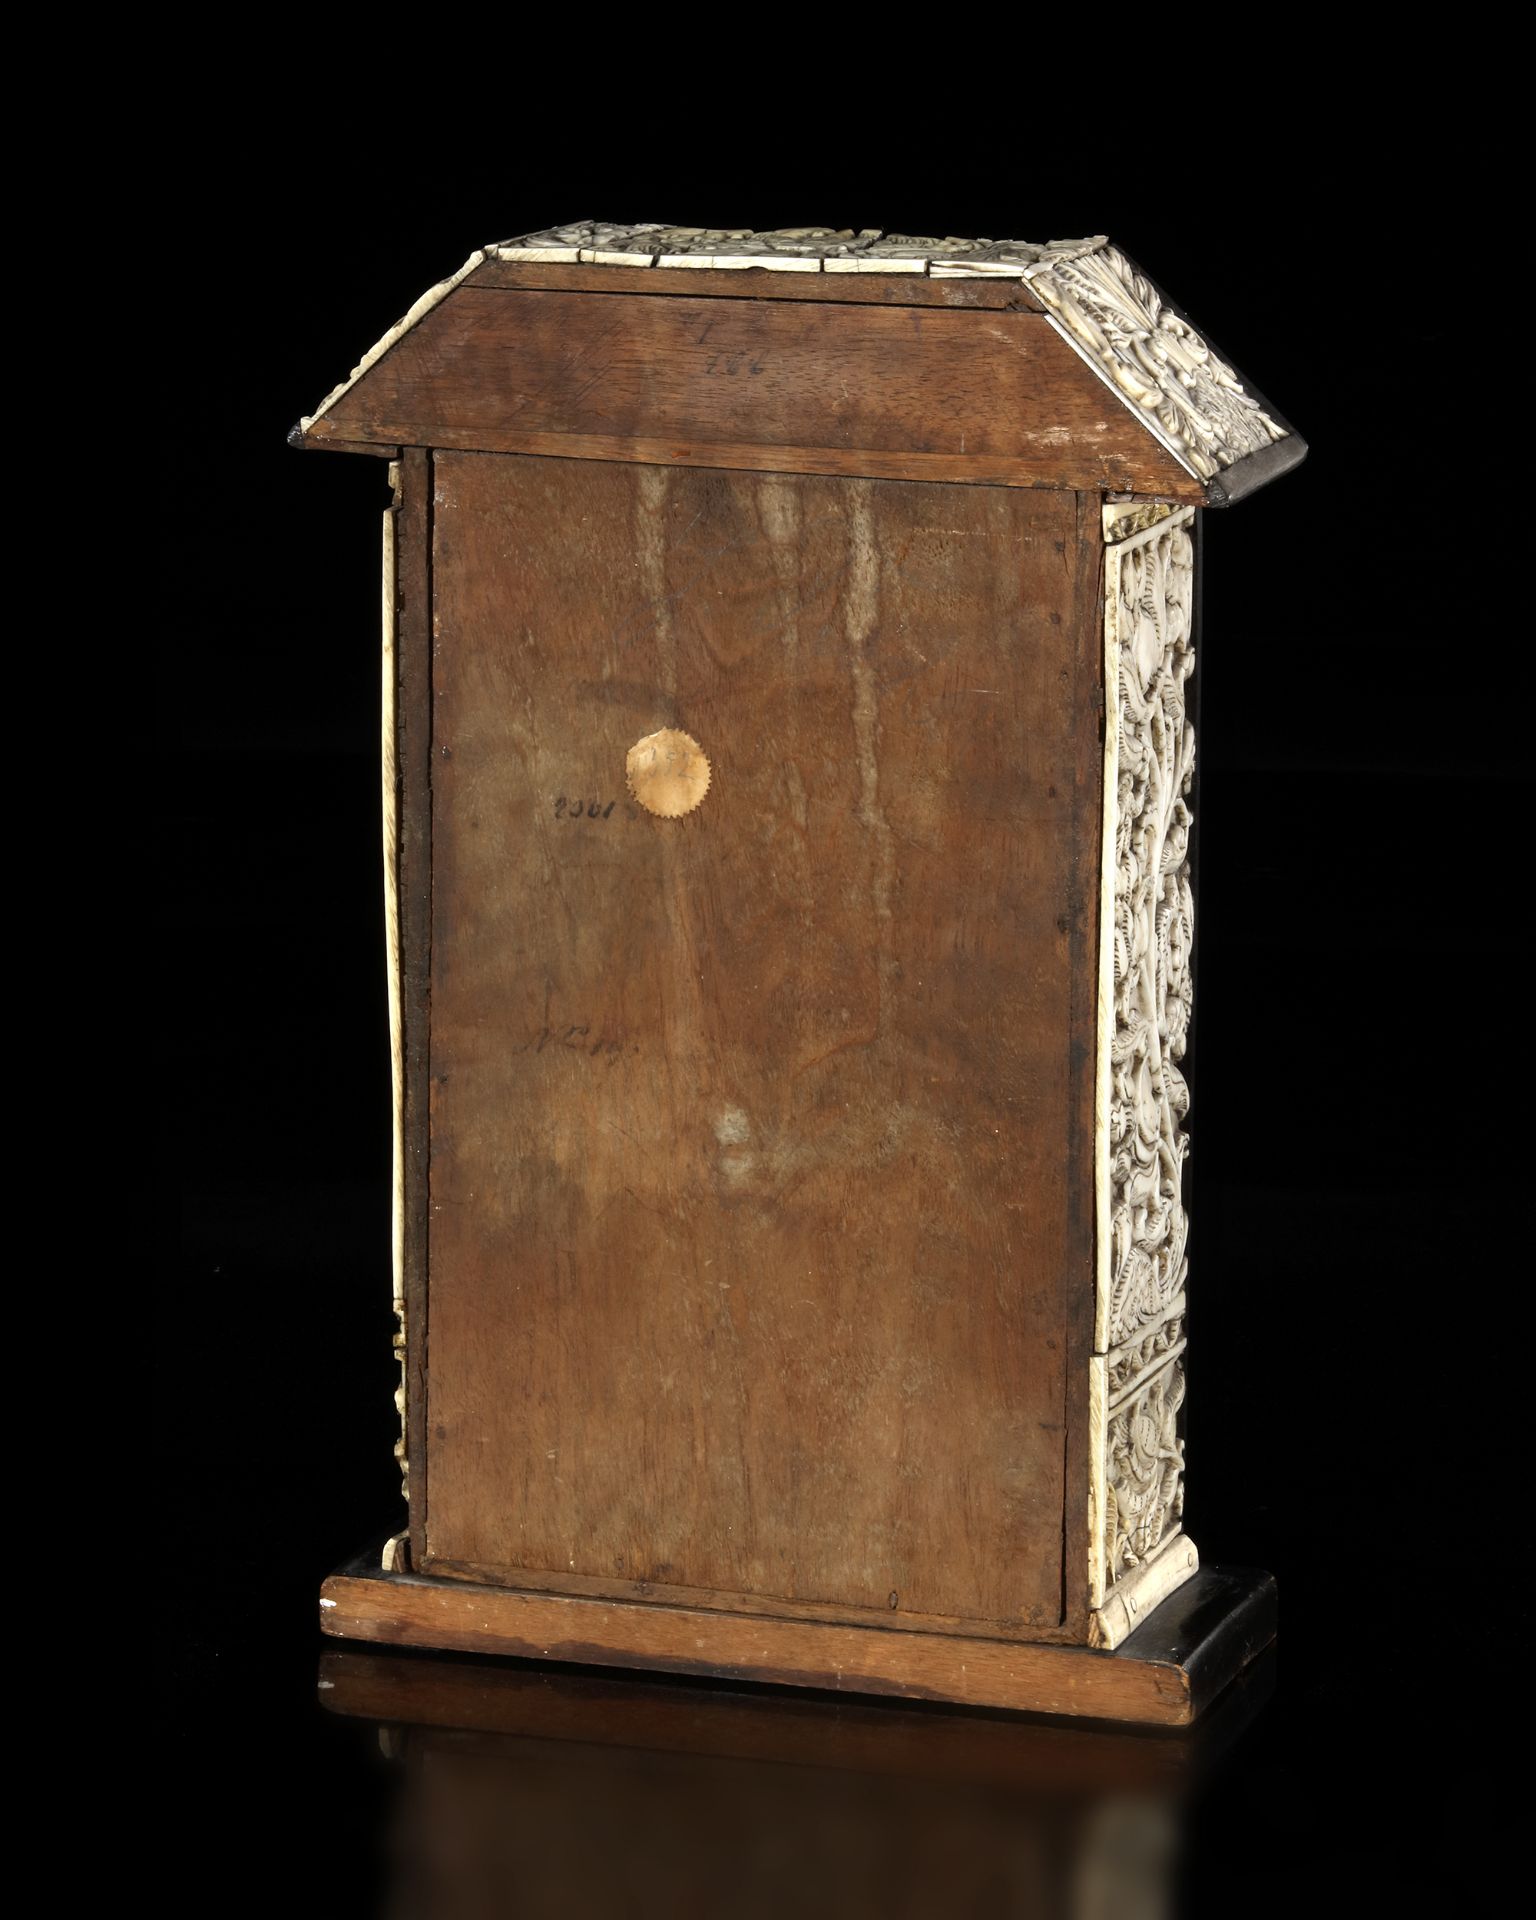 AN IVORY-VENEERED WOODED CABINET, SRI LANKA OR INDIA, LATE 17TH CENTURY - Image 6 of 6